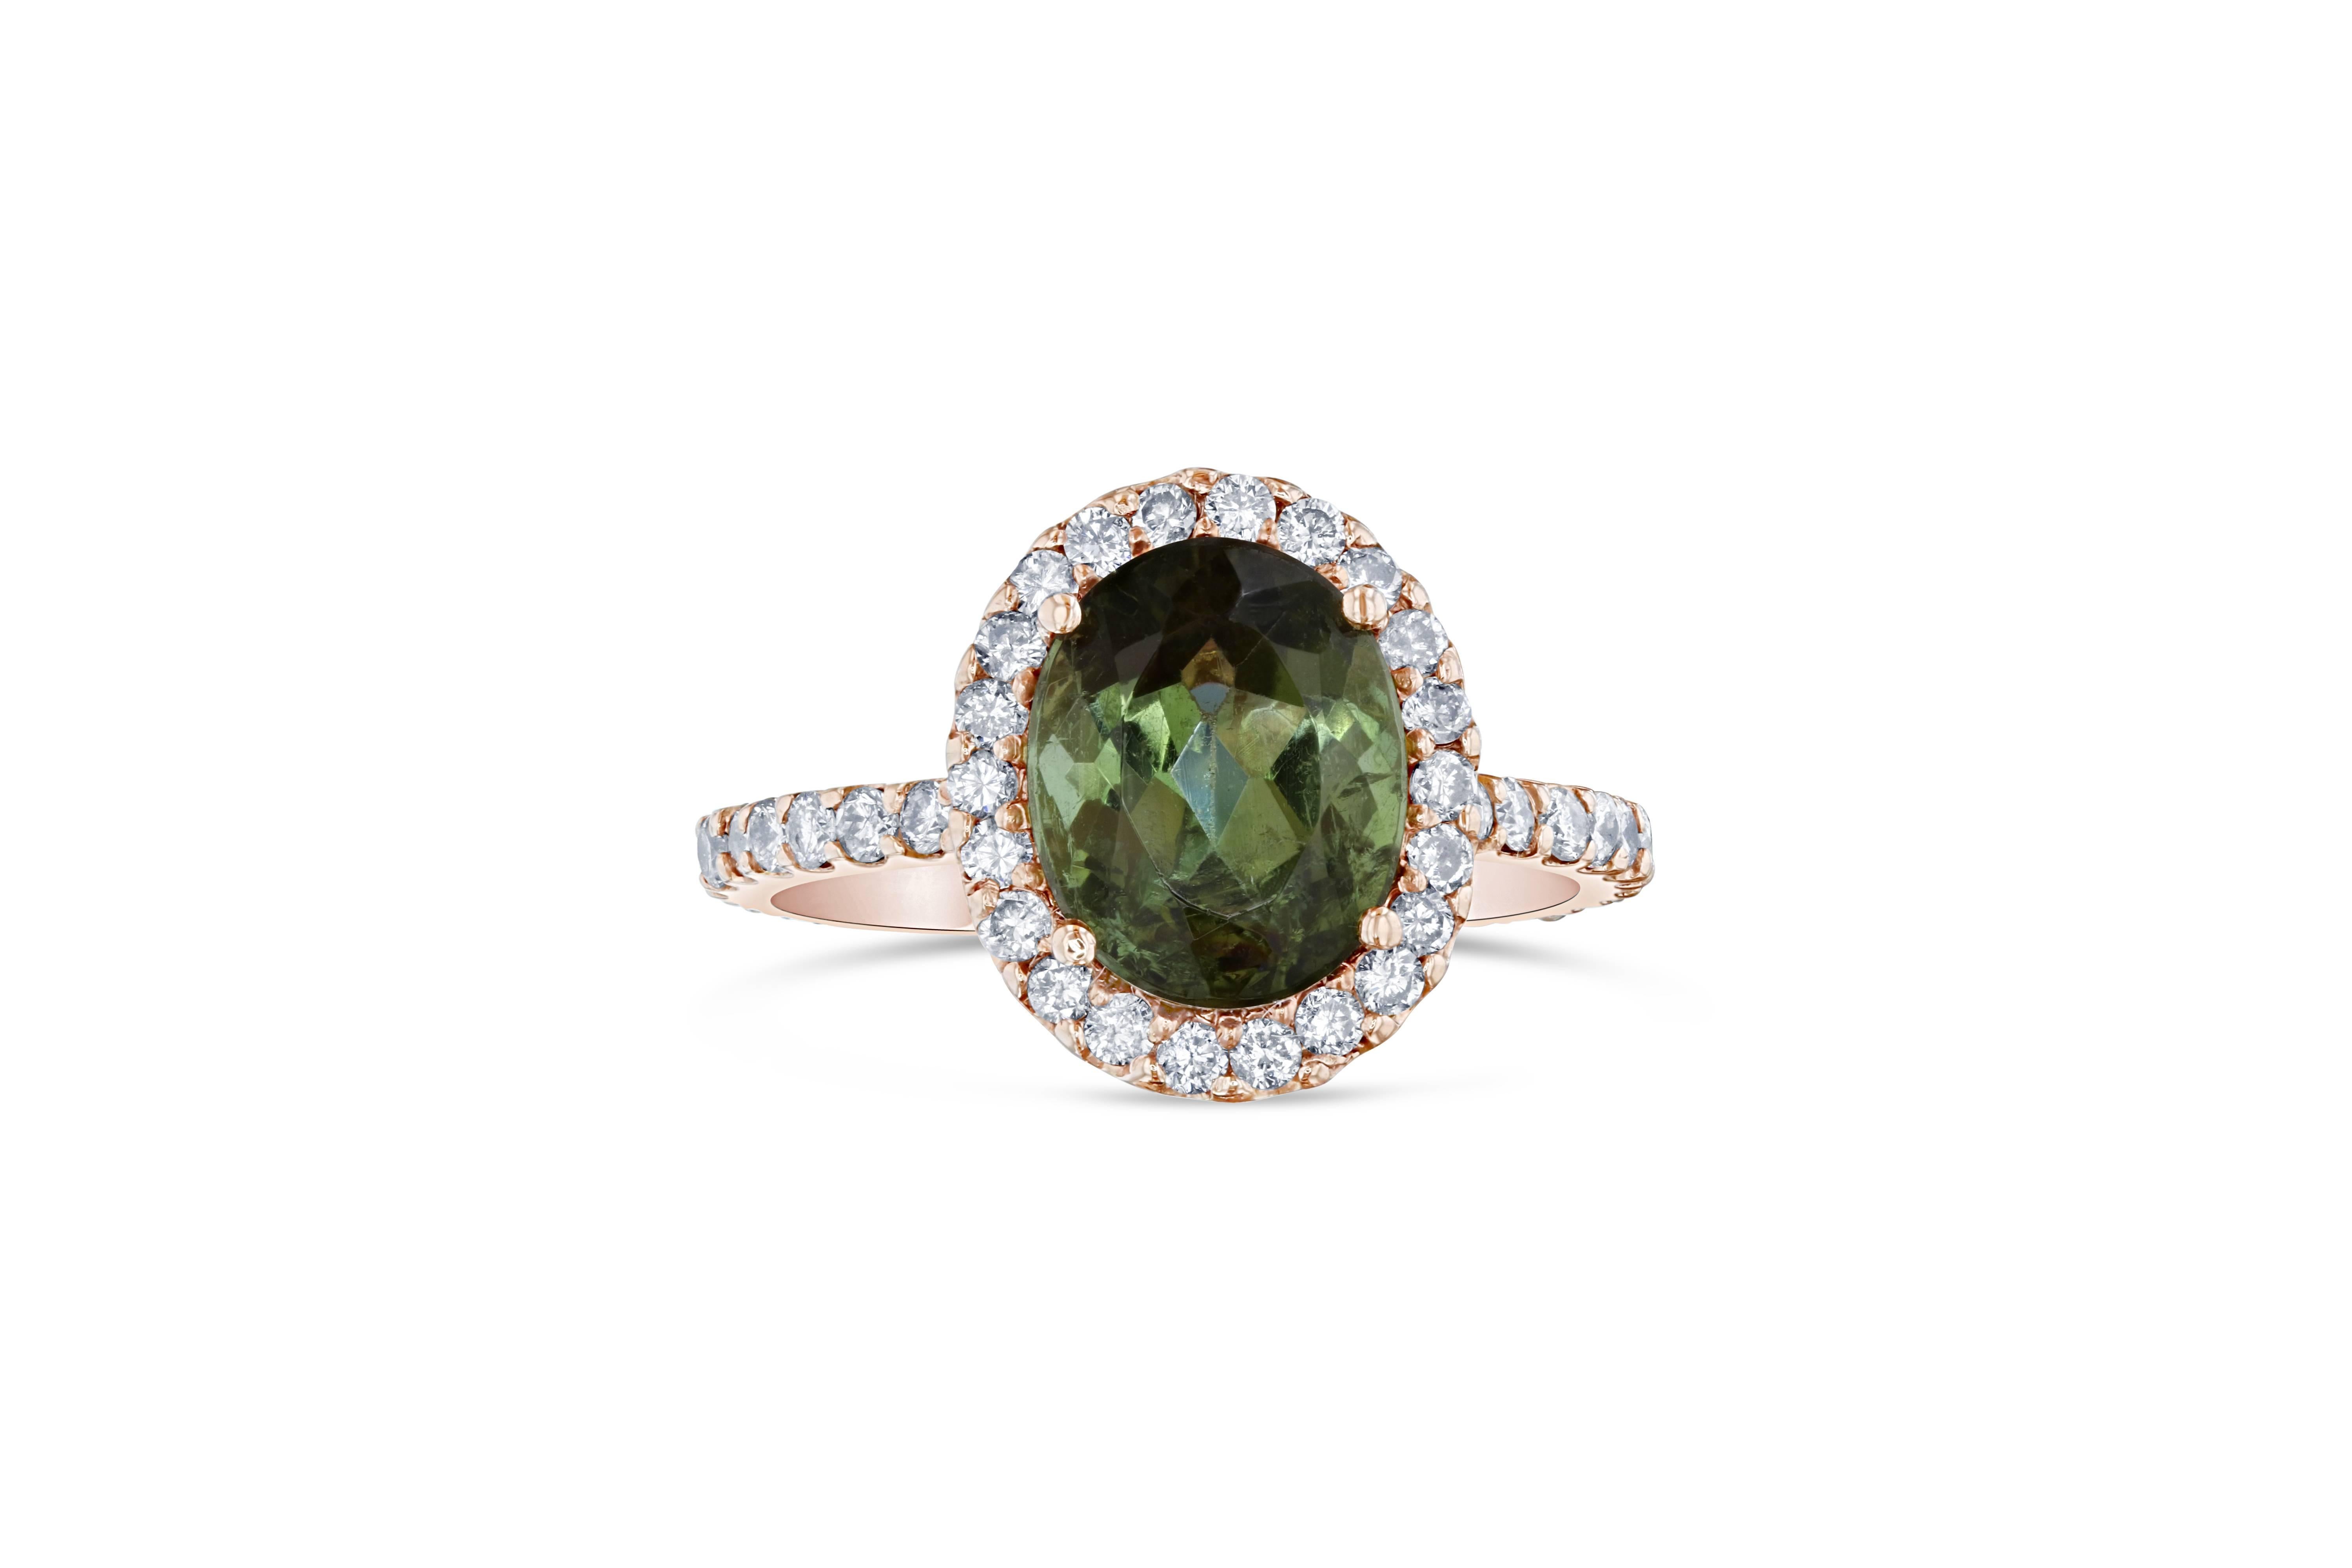 This gorgeous ring has a beautiful Oval cut Green Tourmaline weighing 3.39 Carats and 46 Round Cut Diamonds weighing 0.81 Carats. The total carat weight of the ring is 4.20 Carats. It is set in 14K Rose Gold and is a size 7 1/4. 
Ring sizing can be